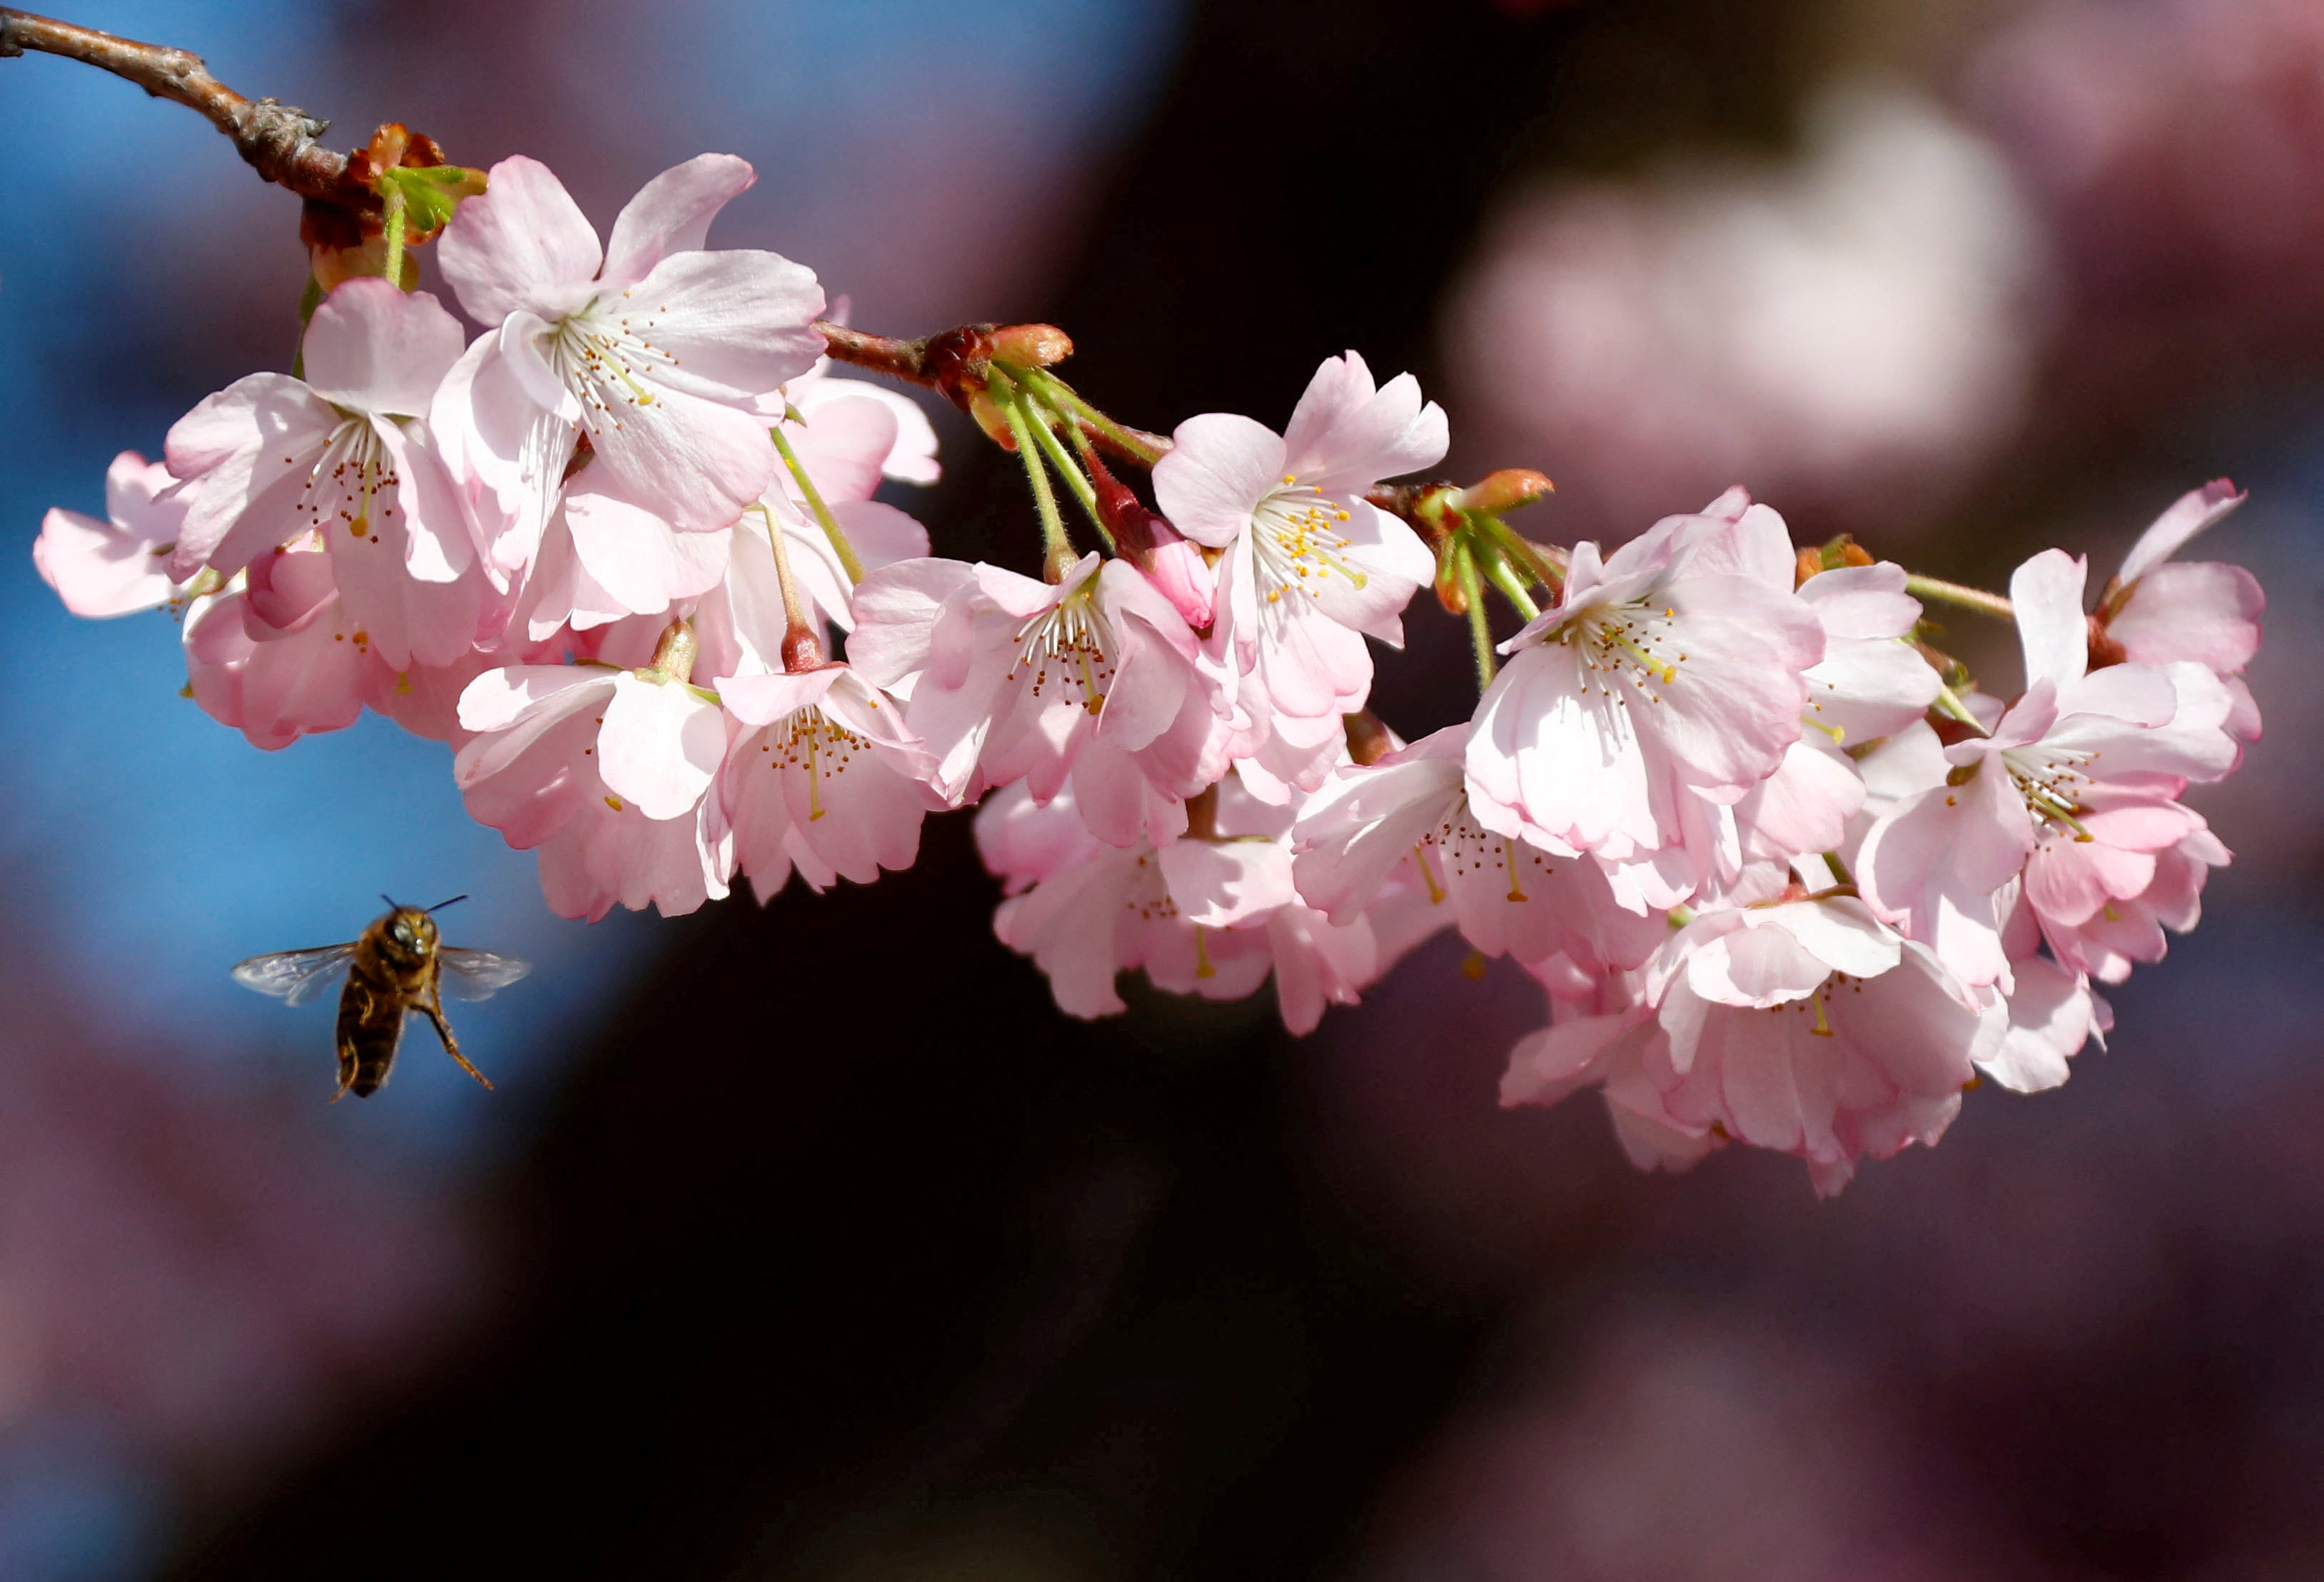 A bee is pictured during a cherry blossom season on a street at Berlin's Lichterfelde district